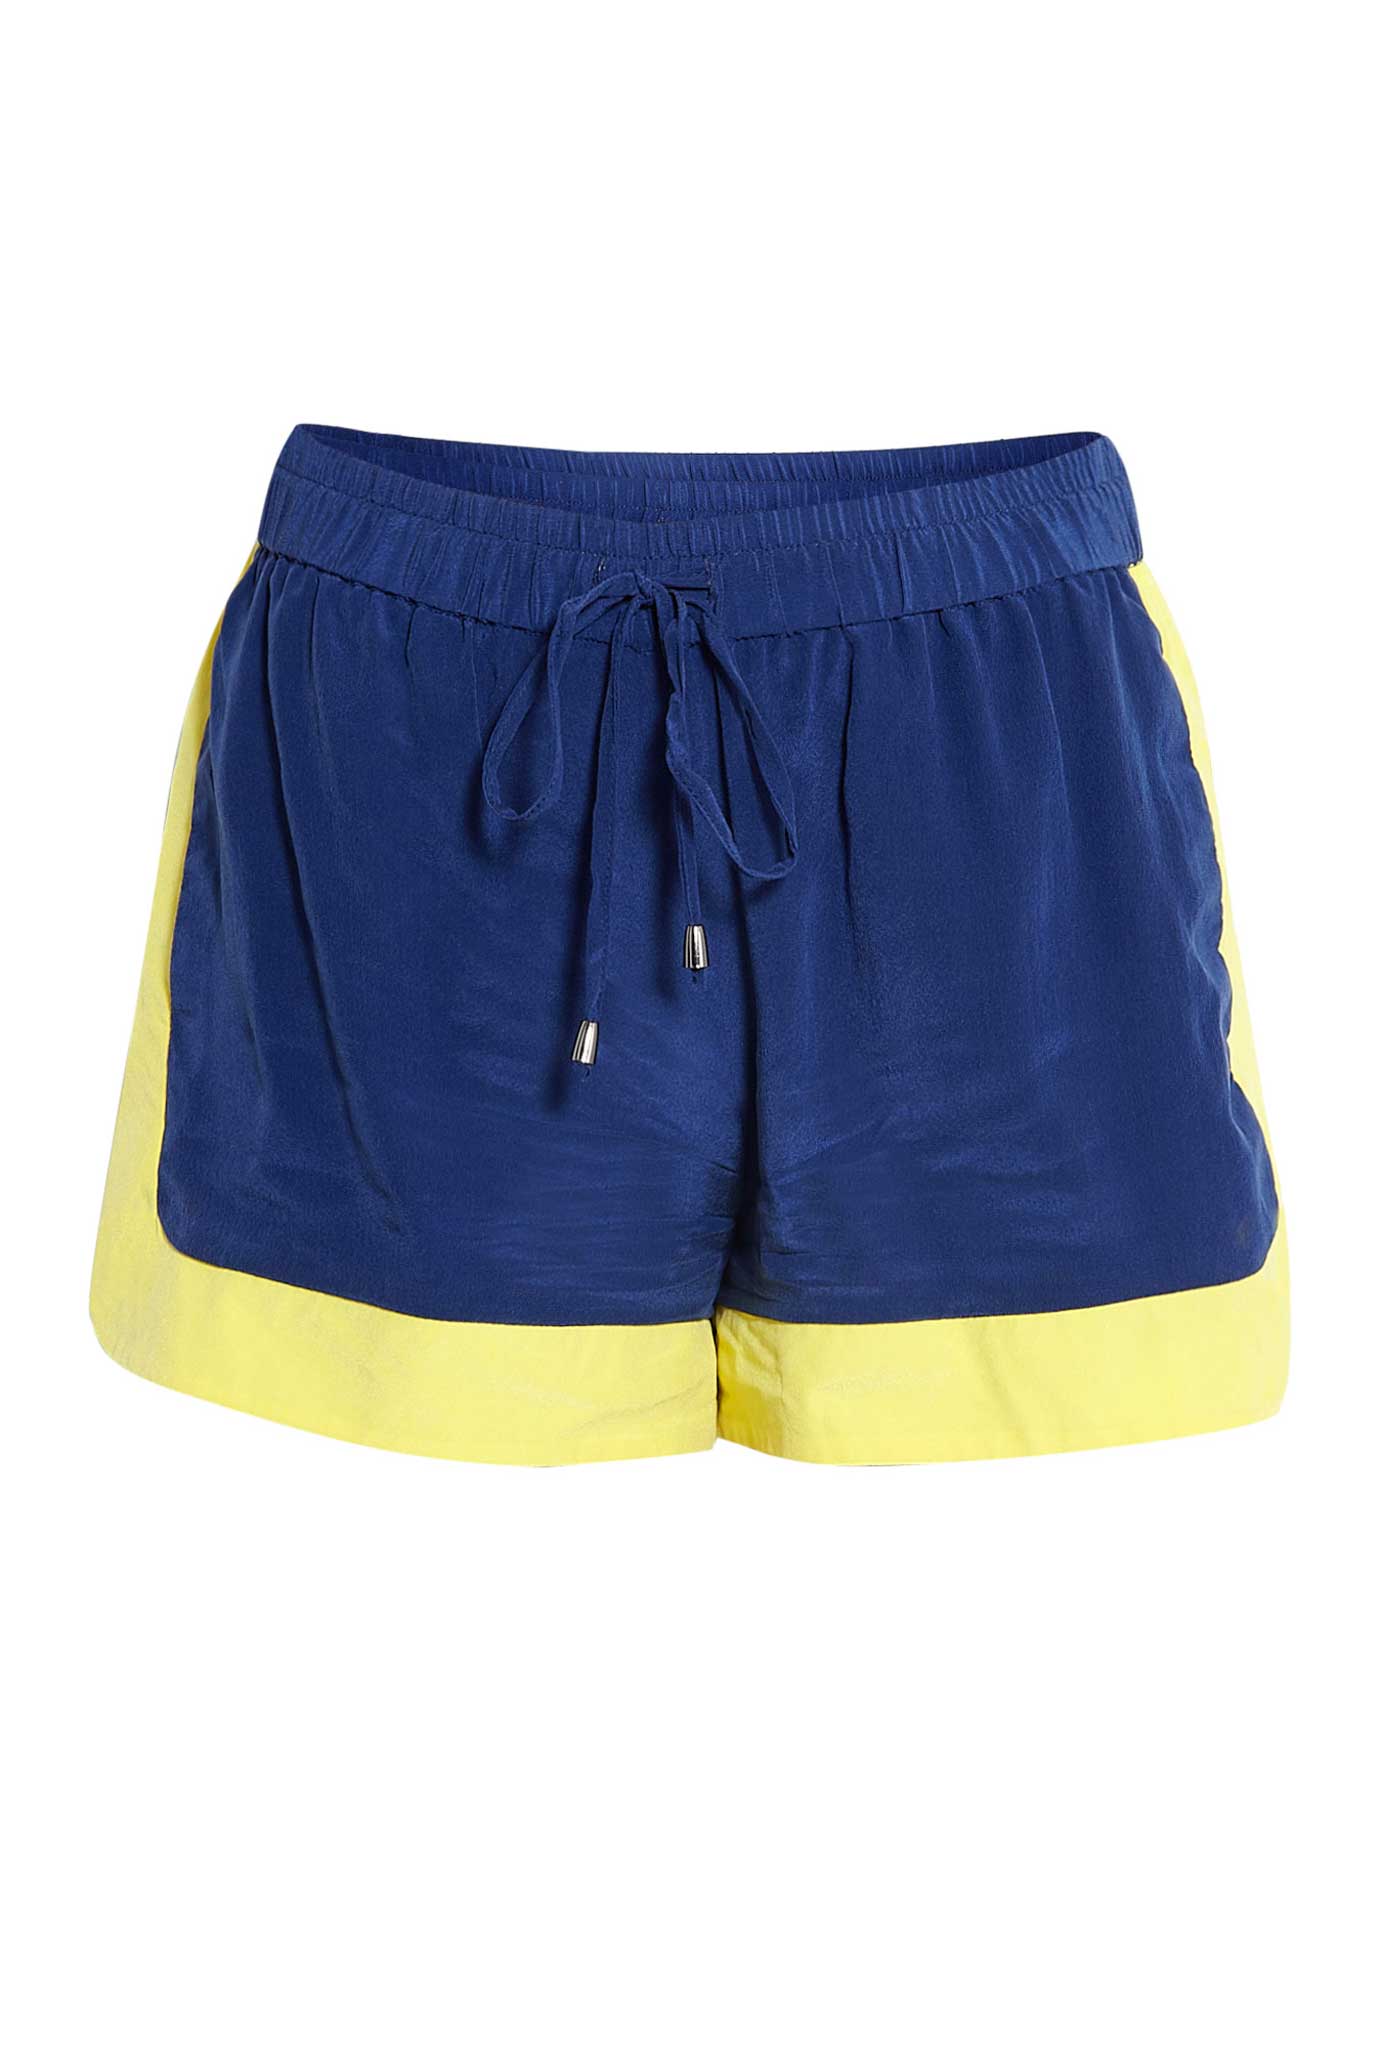 These loose, sports-luxe shorts from Emma Cook (£216, my-wardrobe.com) are casual with a tee and flats or sharpened up with a jacket and wedges